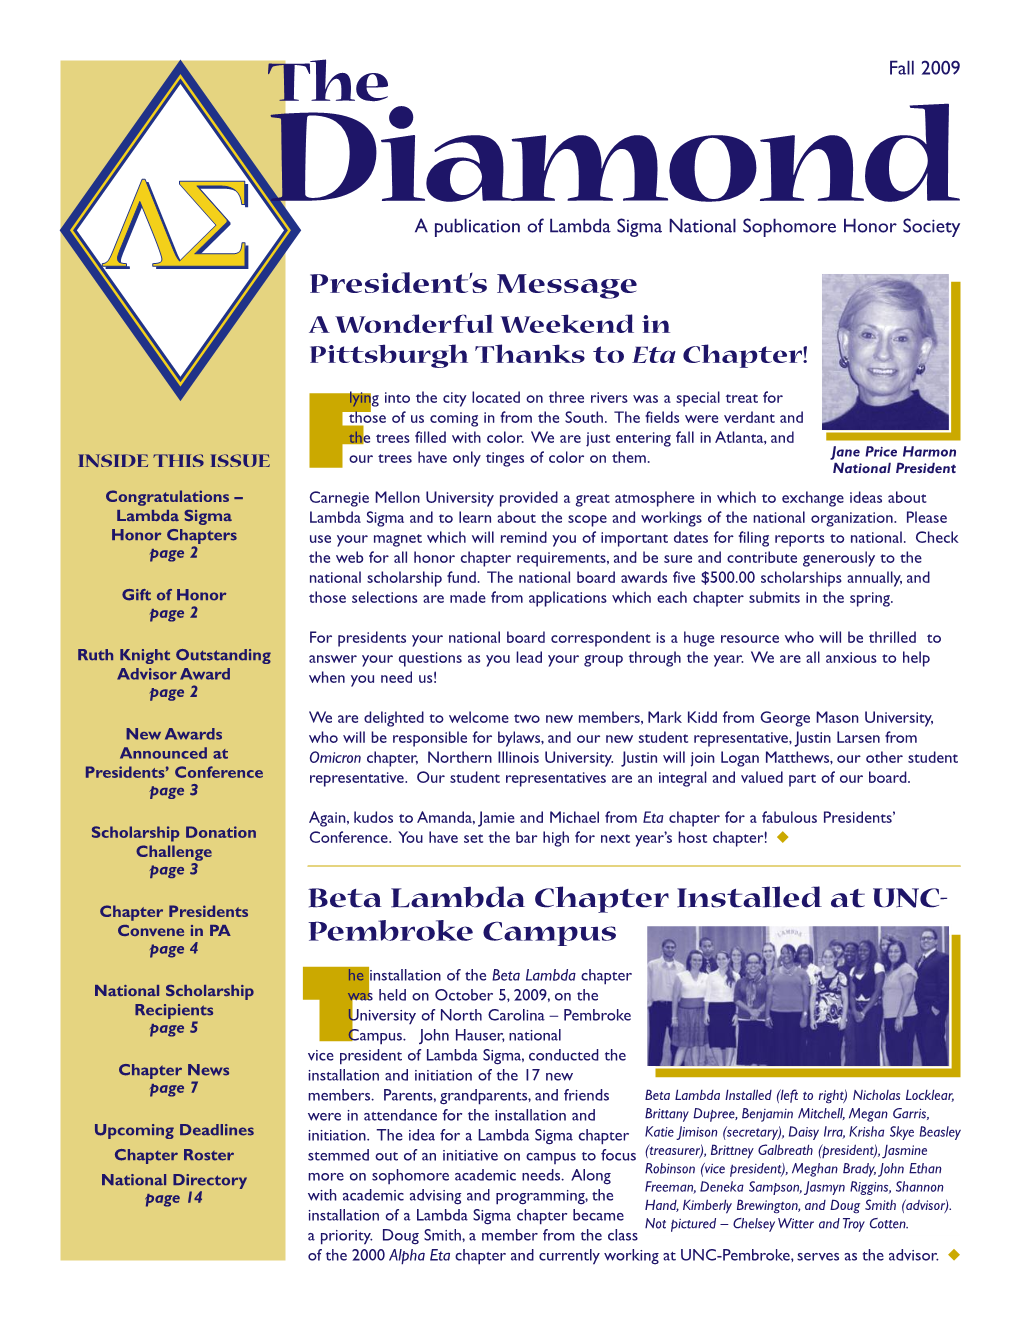 Fall 2009 Diamond a Publication of Lambda Sigma National Sophomore Honor Society President’S Message a Wonderful Weekend in Pittsburgh Thanks to Eta Chapter!